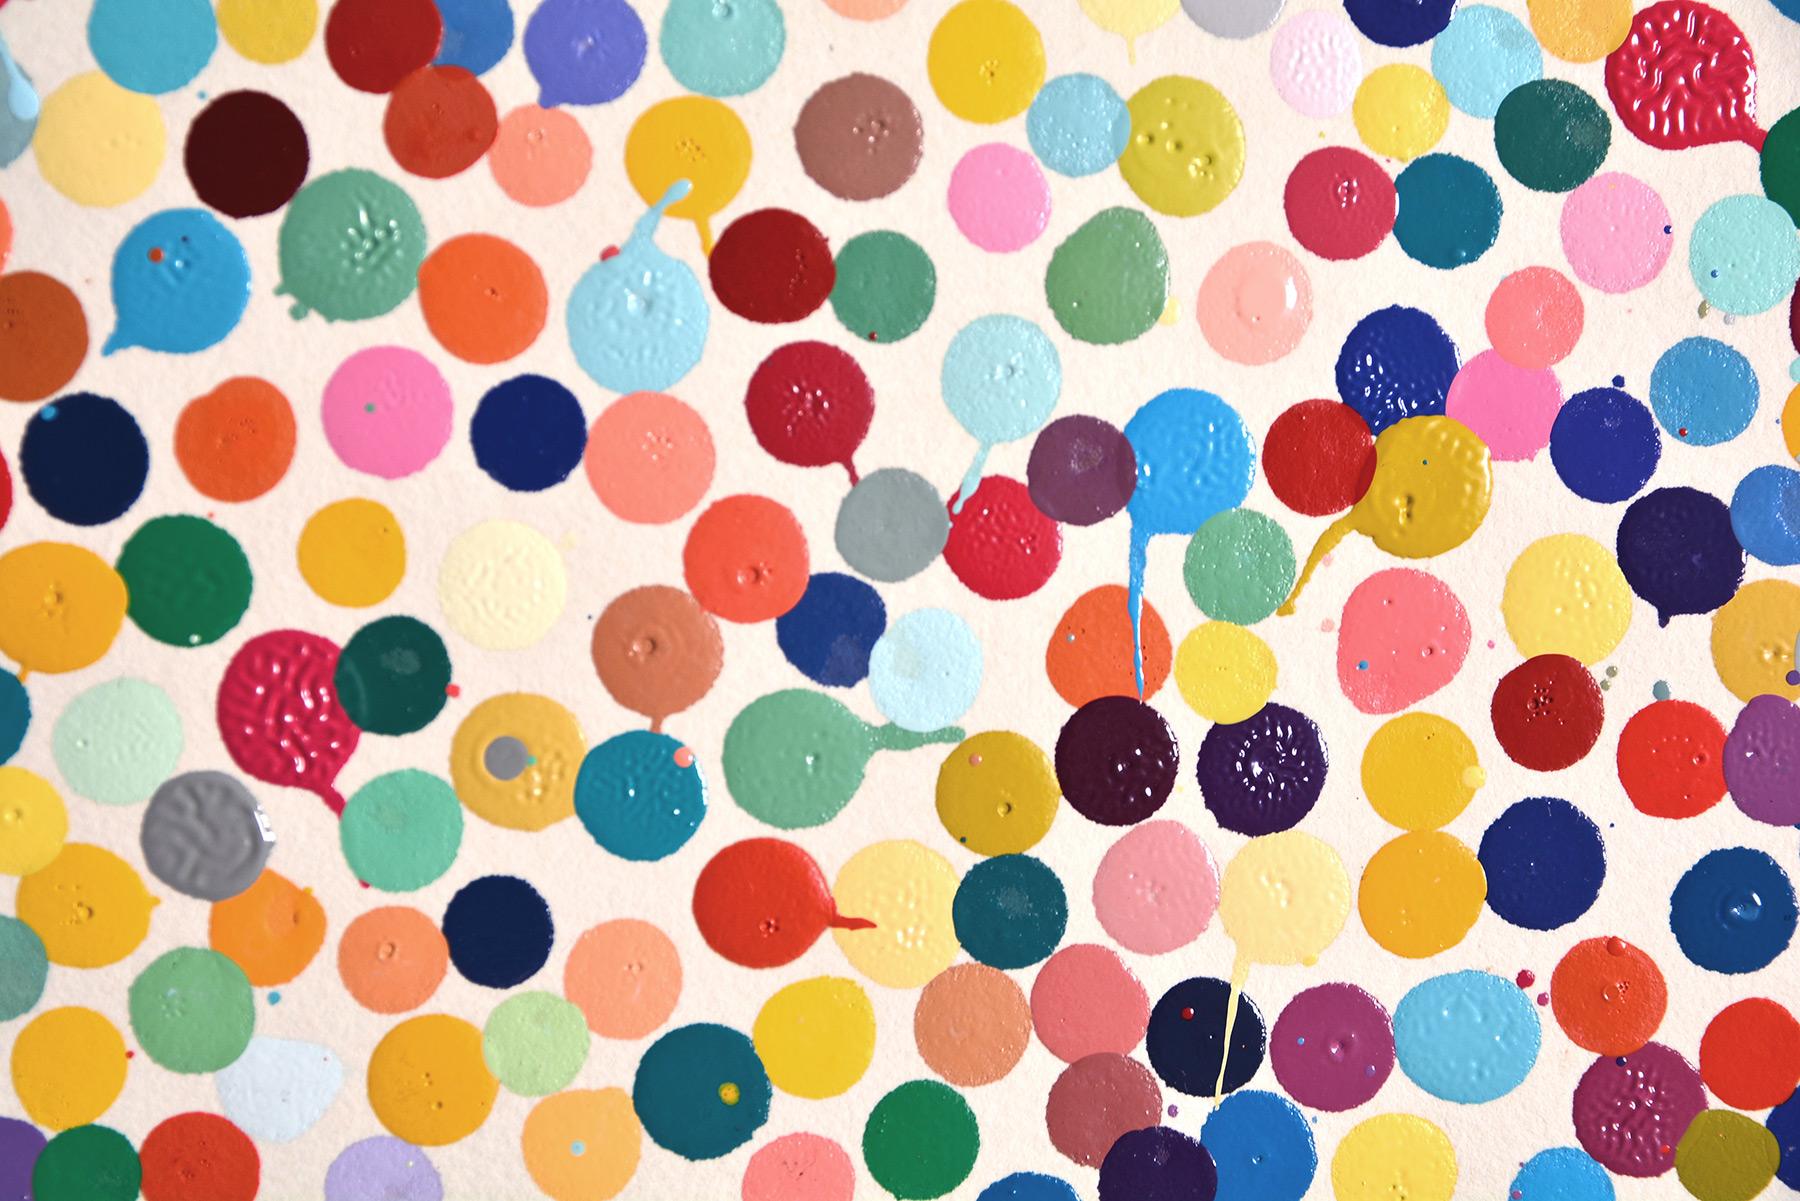 DAMIEN HIRST - THE CURRENCY. Original work The Currency Project. Dots. Colors 3